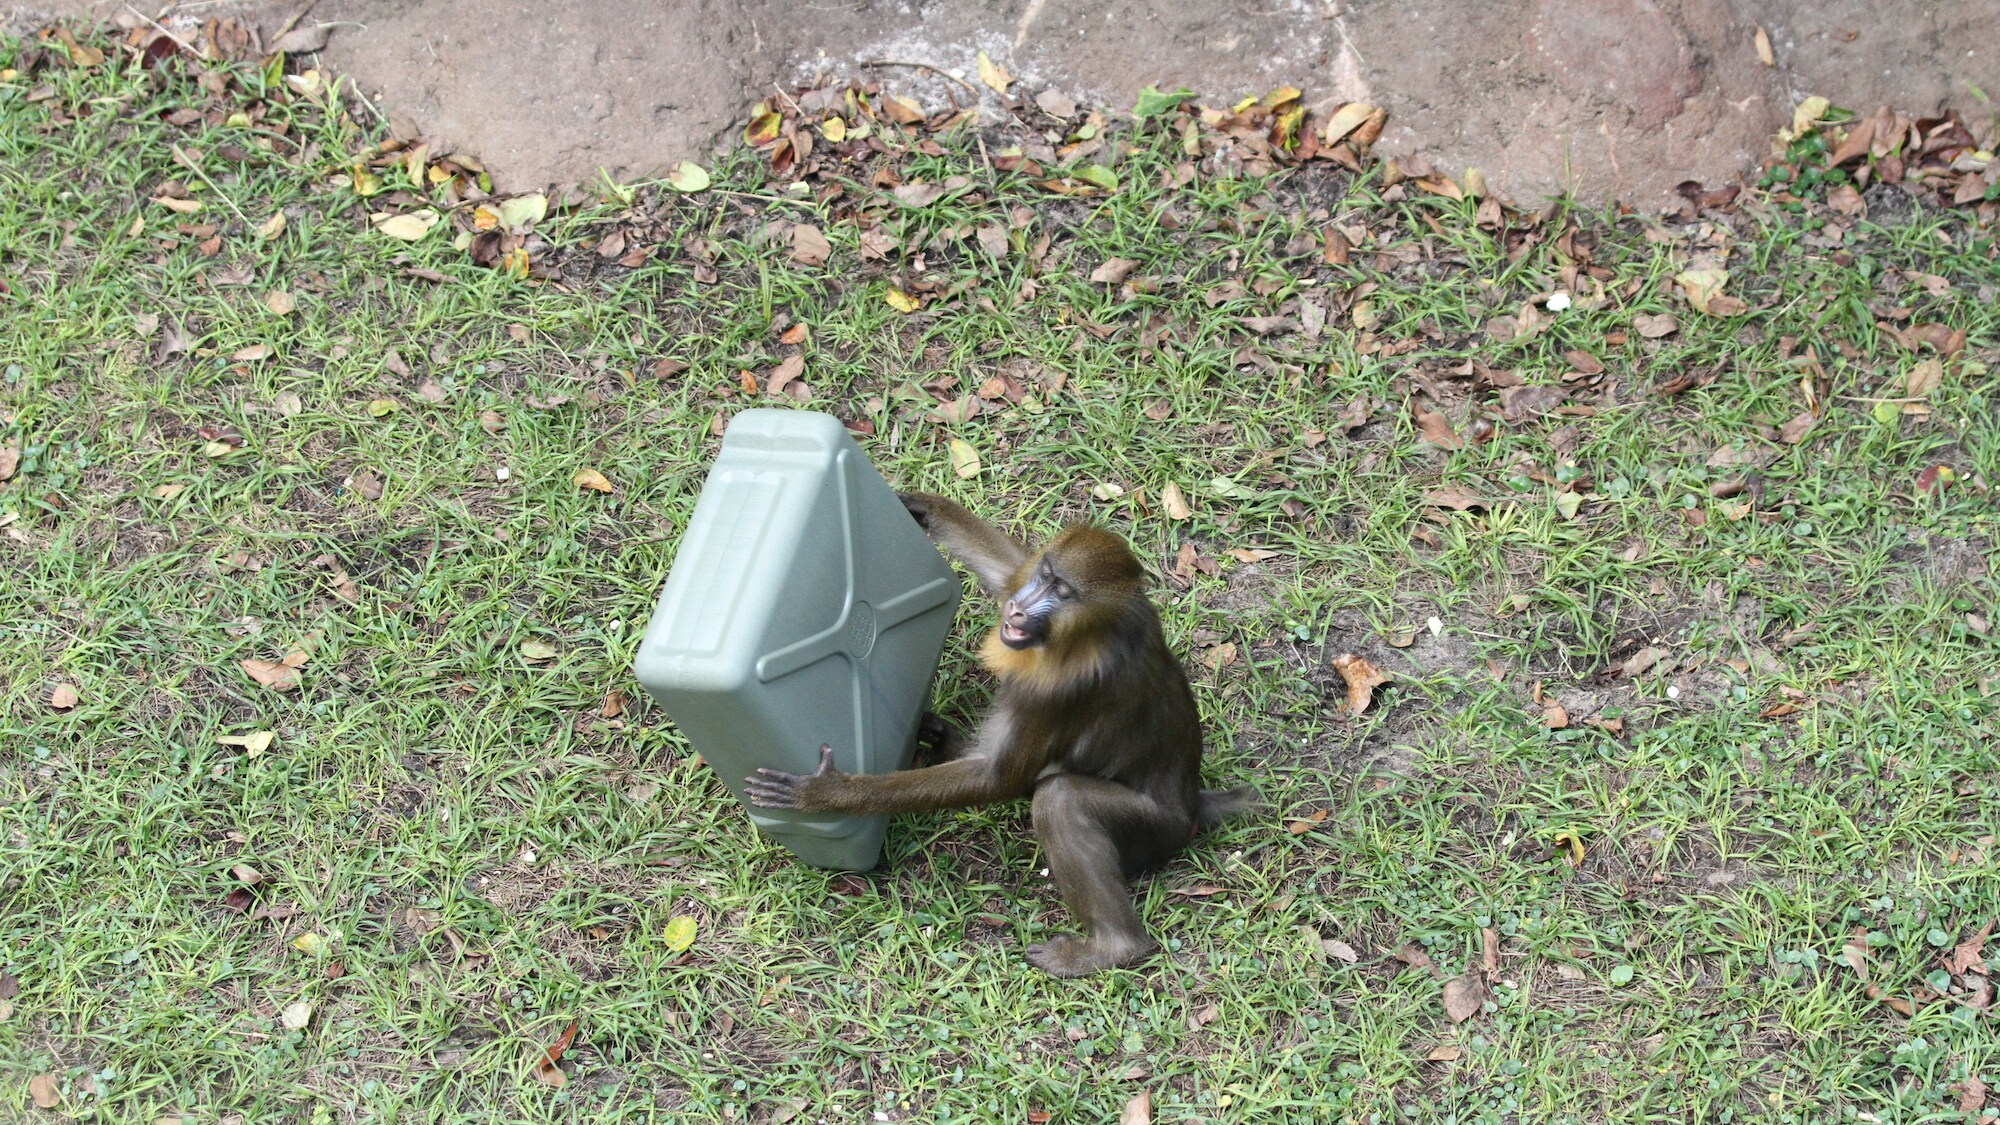 Mandrill investigates an enrichment item placed in the enclosure by the keepers as source of food and stimulation. (Disney)